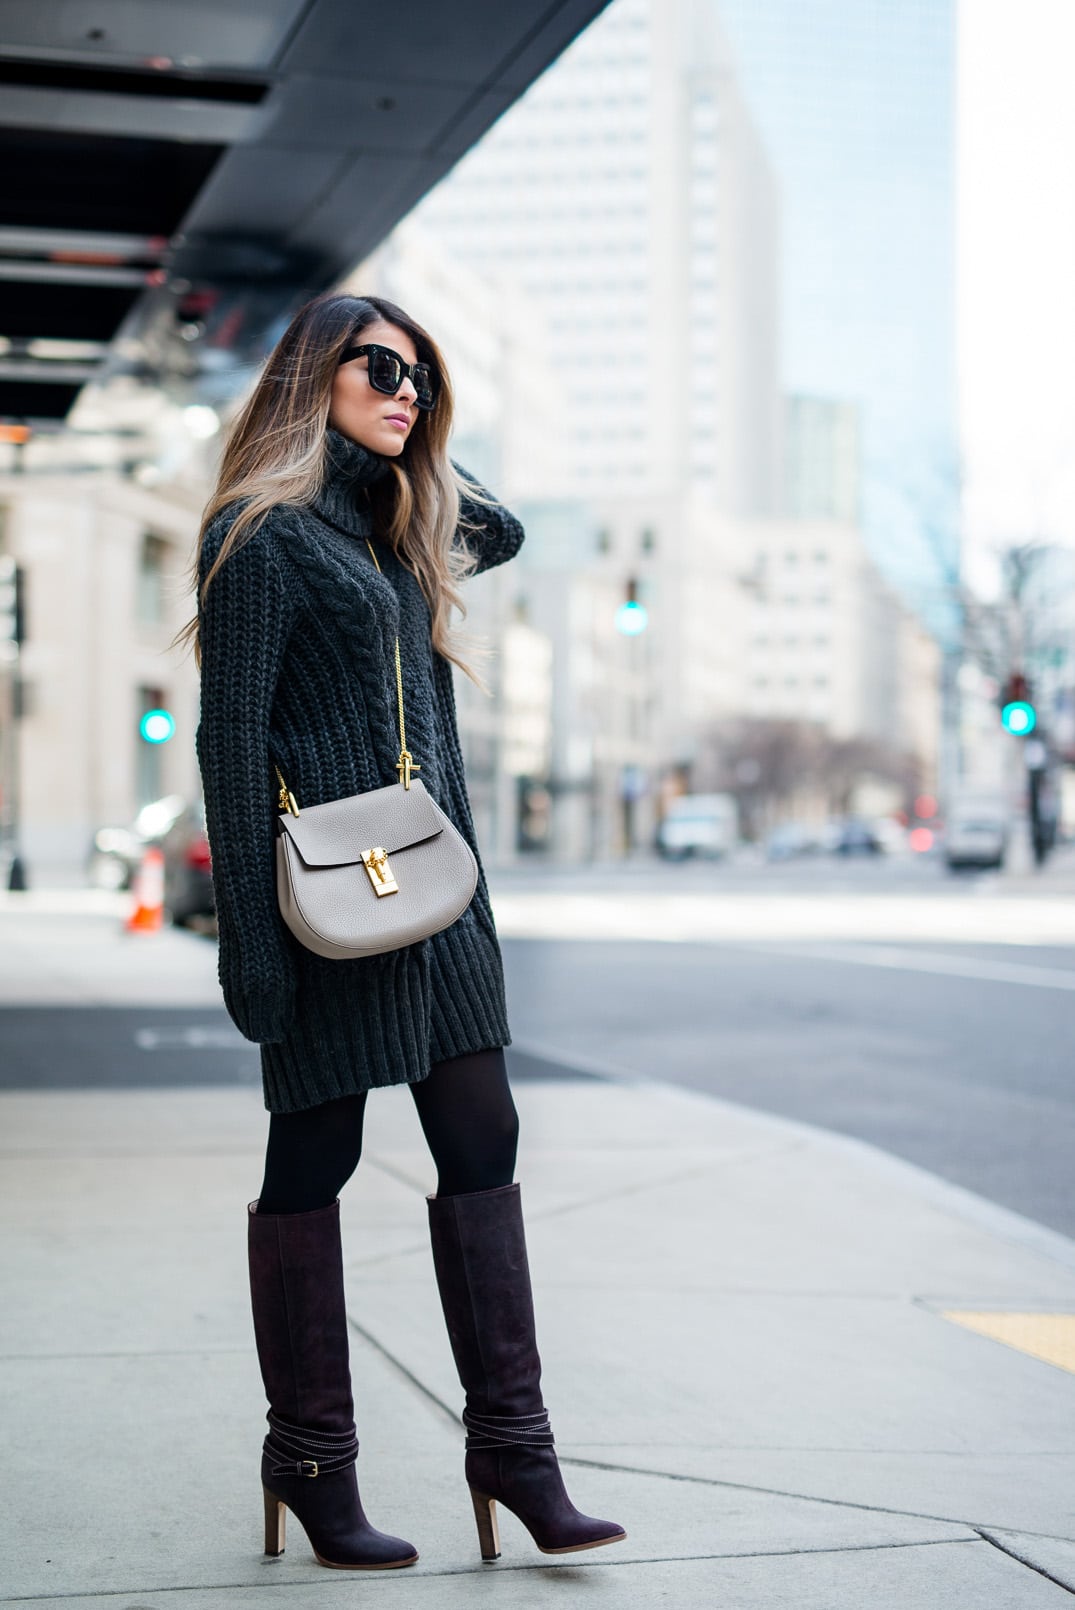 sweater dress with high boots